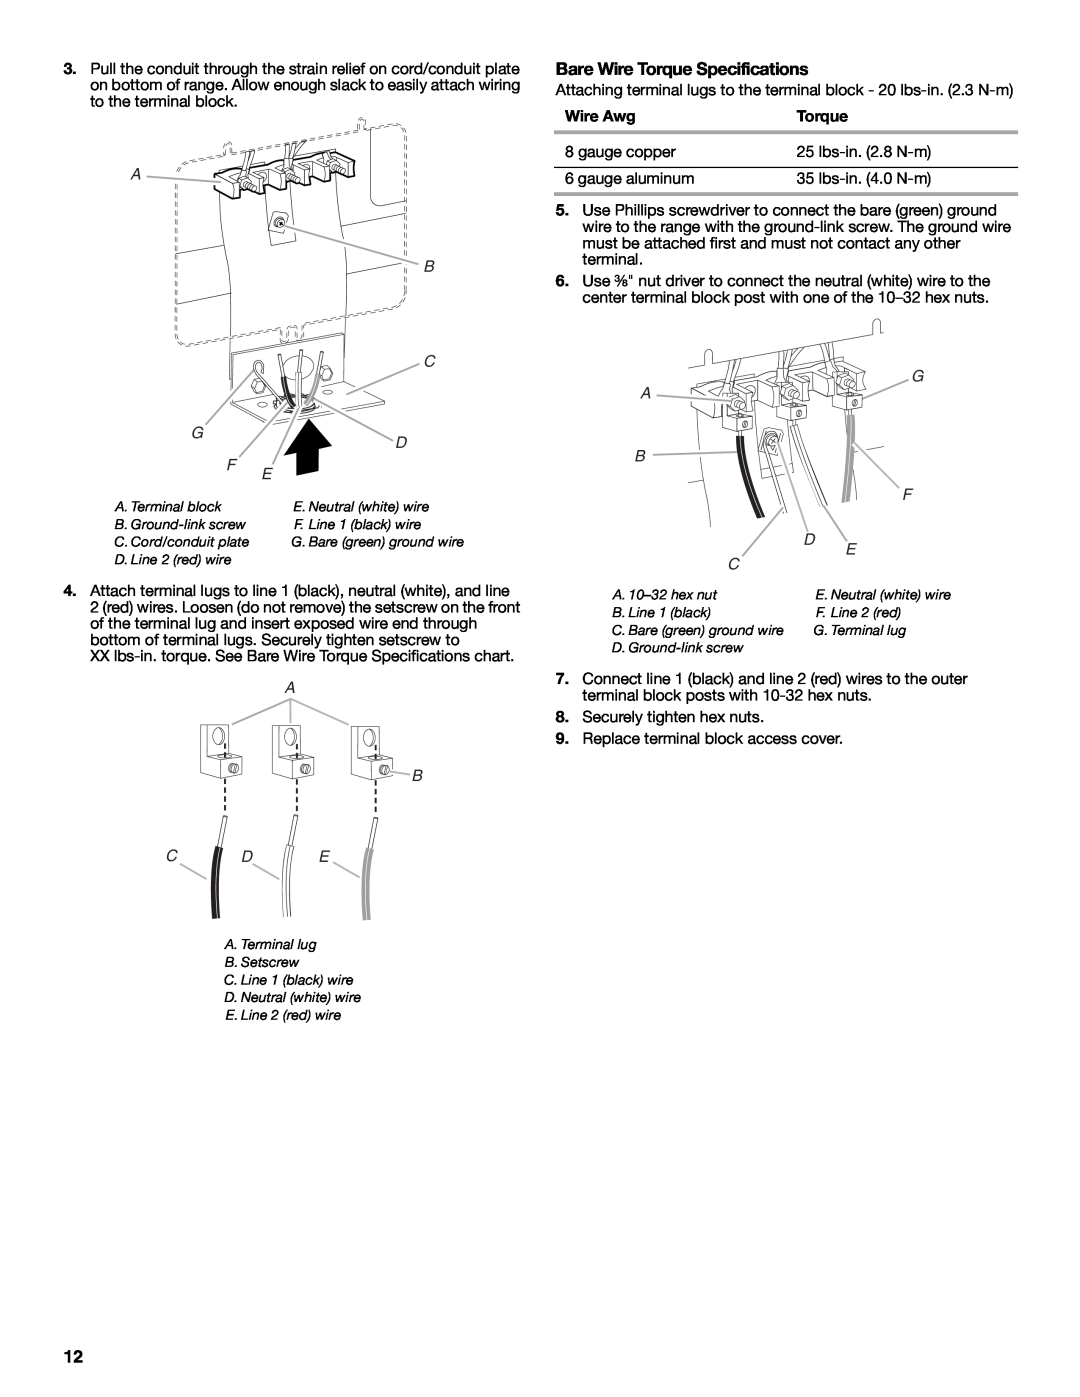 Whirlpool W10270322A installation instructions Bare Wire Torque Specifications, A B C D E, Wire Awg 